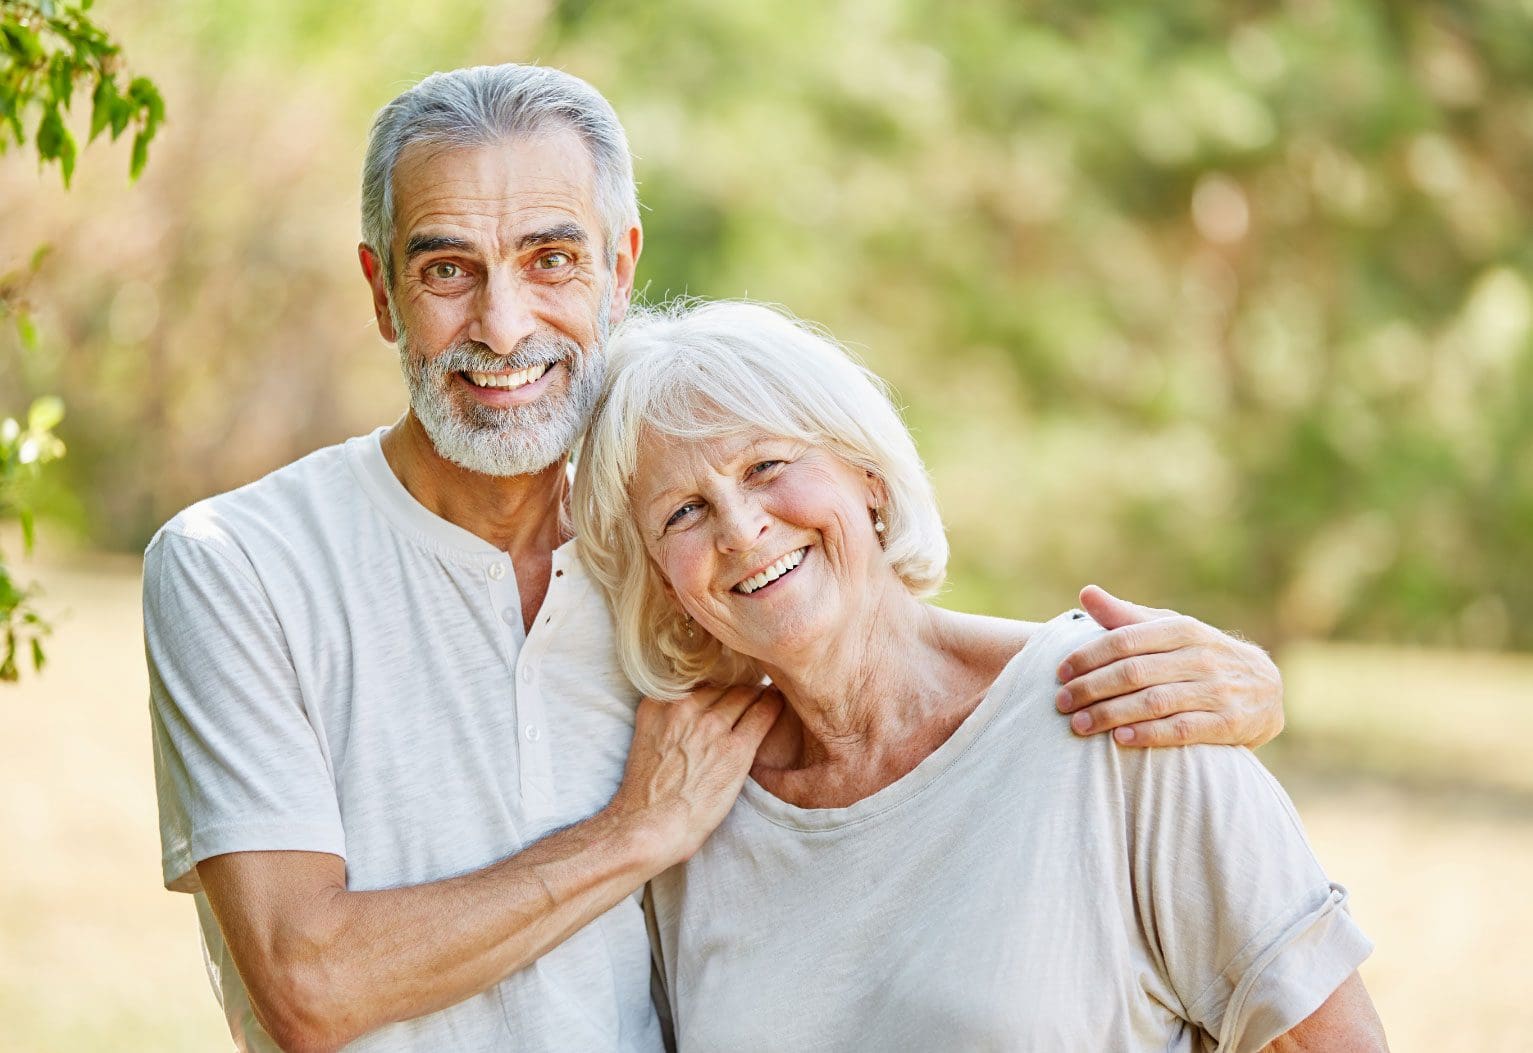 Smiling elderly couple in nature surround